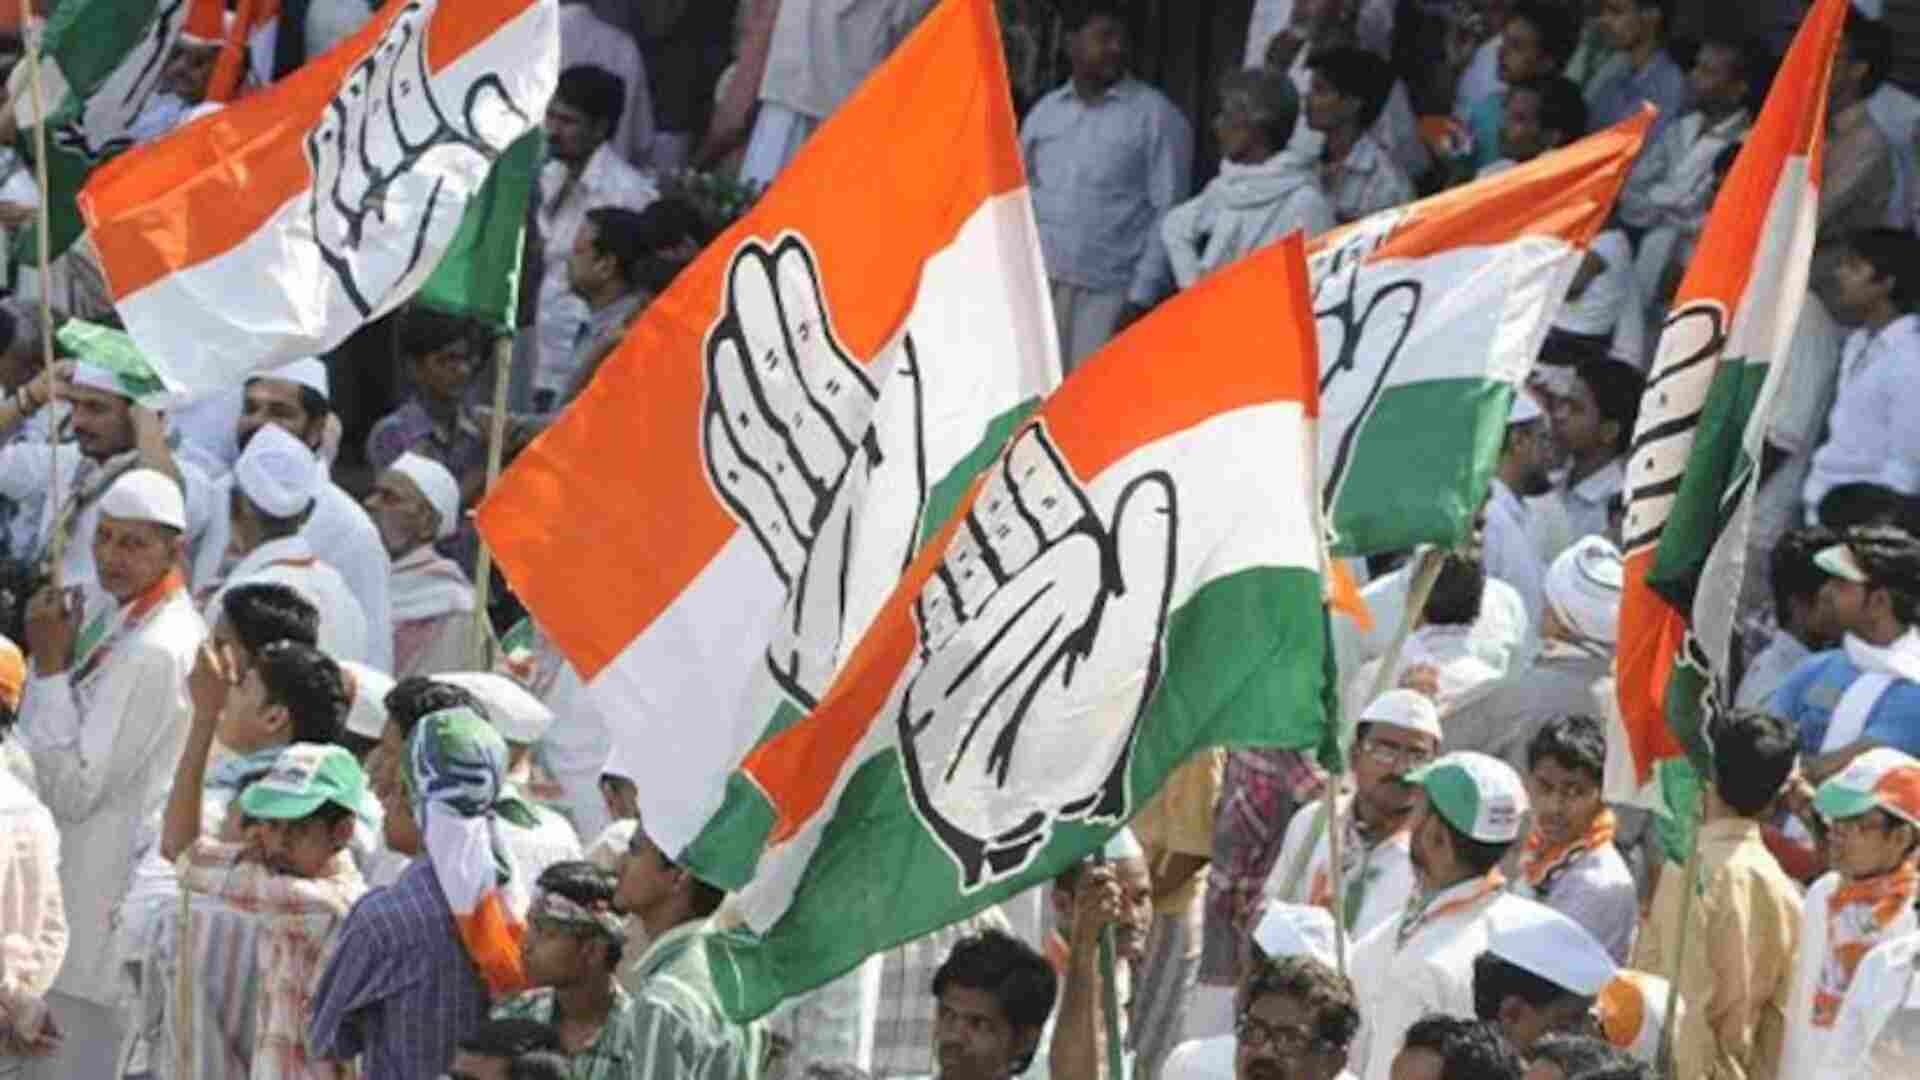 Economic survey ‘cherry-picked’ view, says India in its most precarious economic situation: Congress